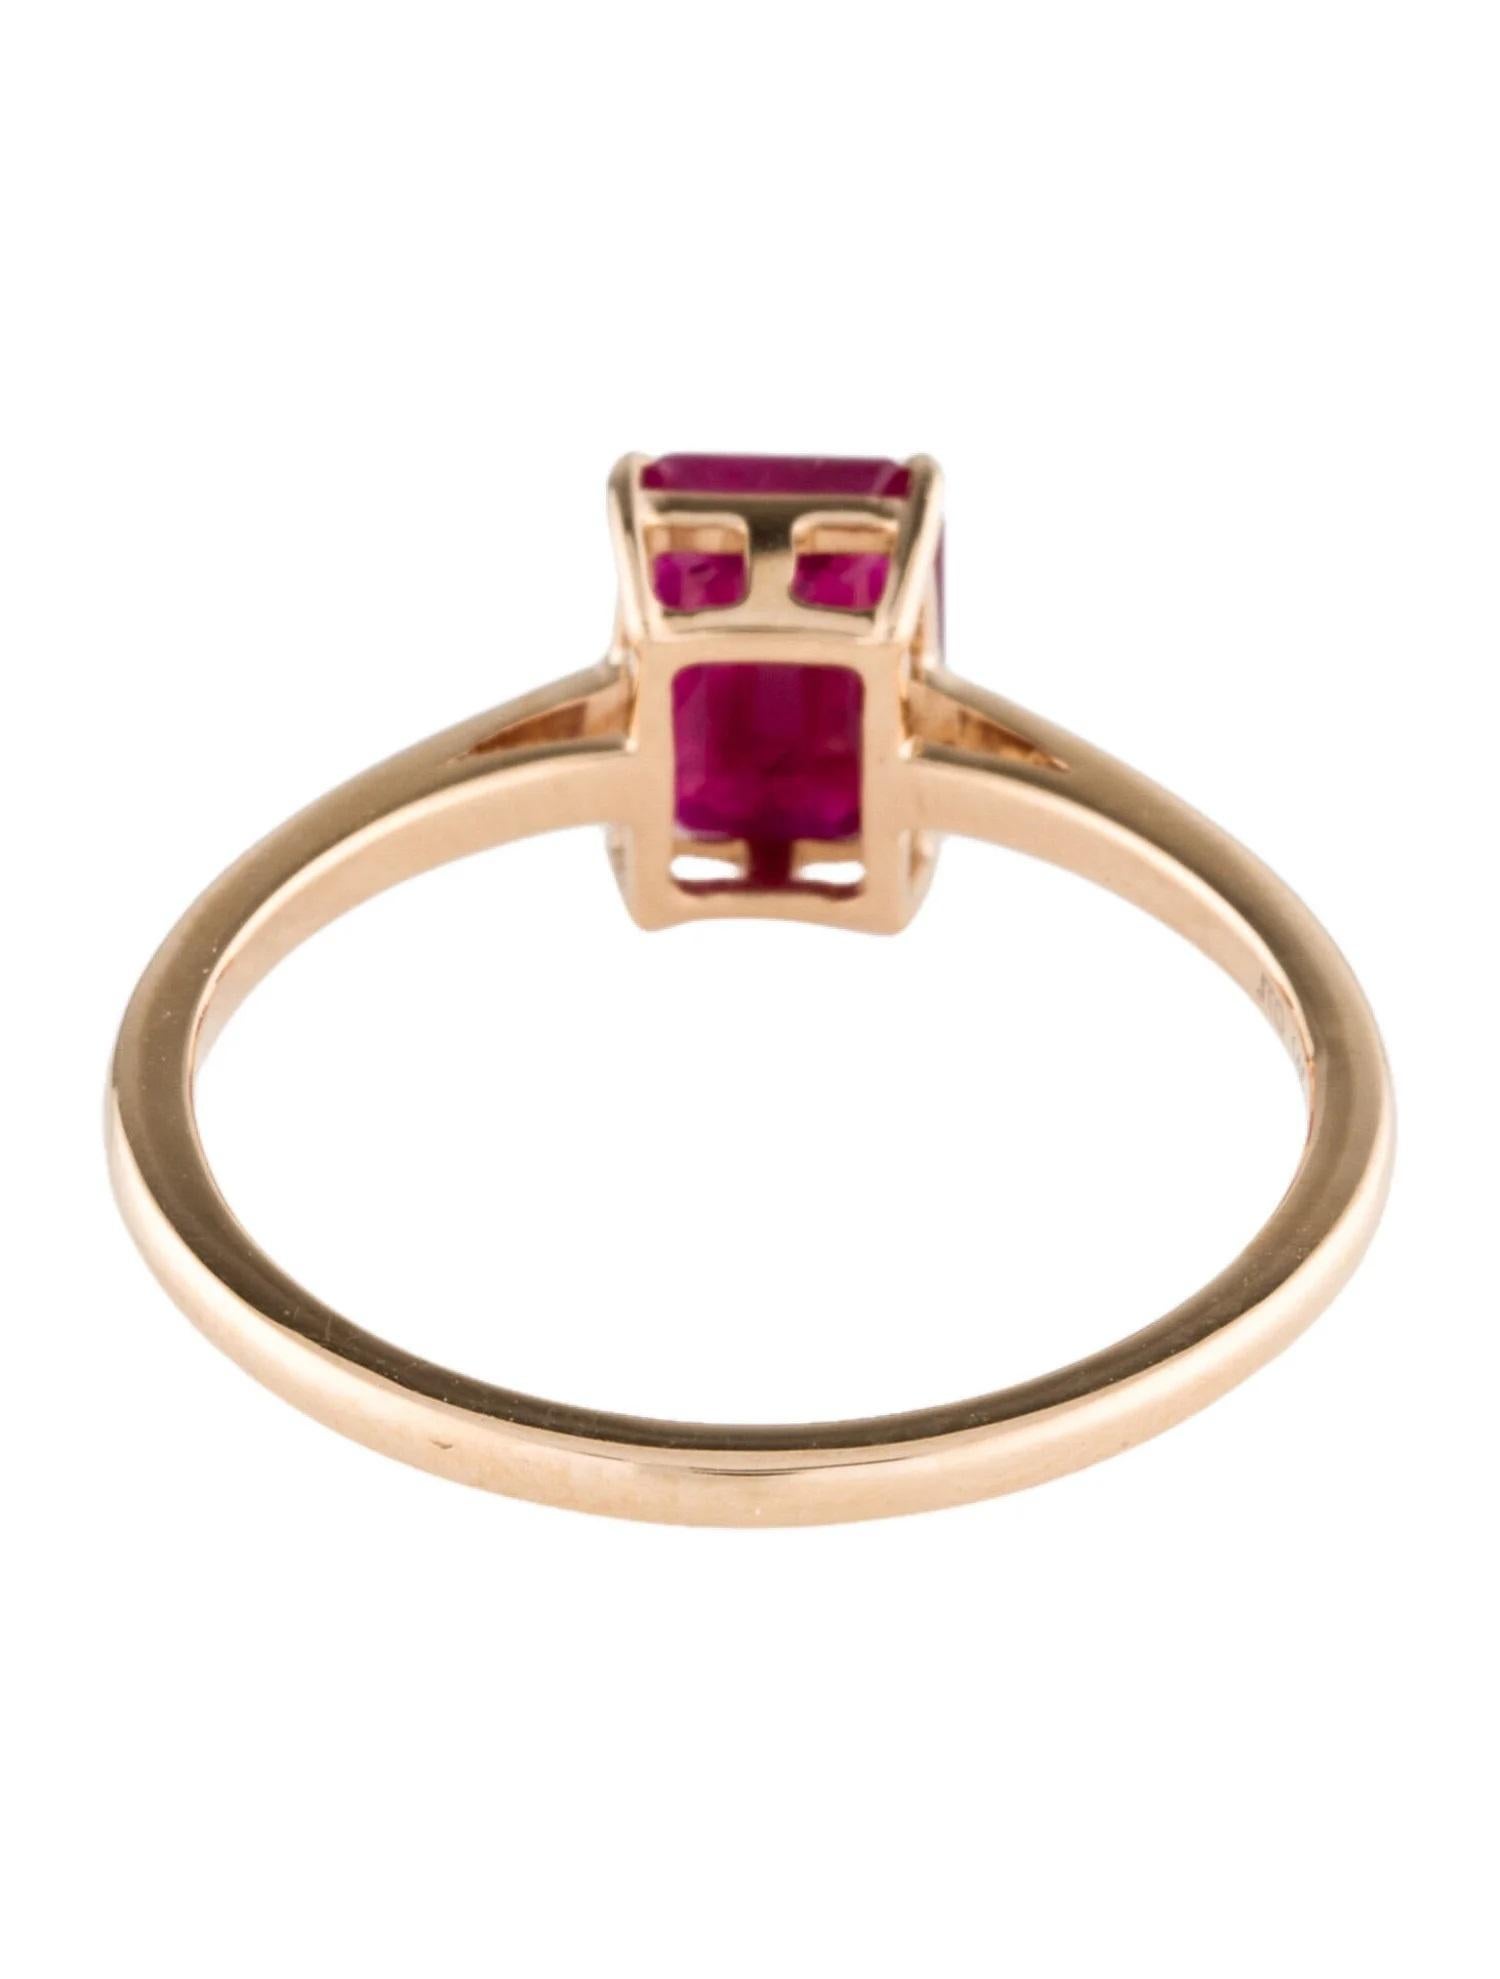 Emerald Cut 14K Yellow Gold Ruby Cocktail Ring: Timeless Elegance & Brilliance